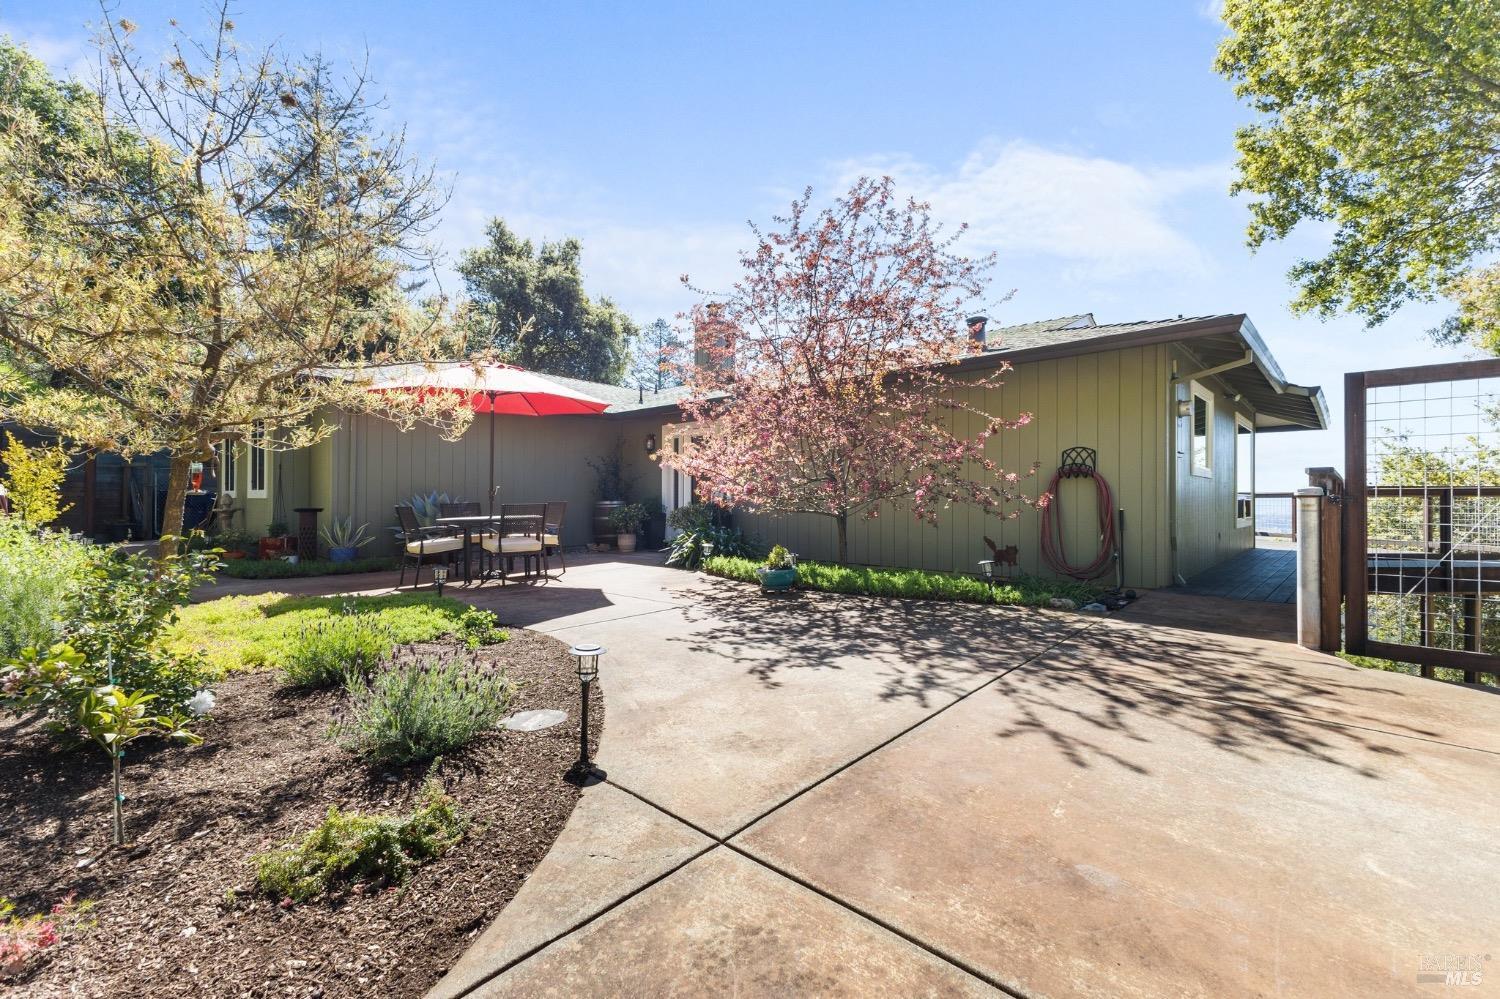 Photo of 26880 Toyon Ln in Cloverdale, CA